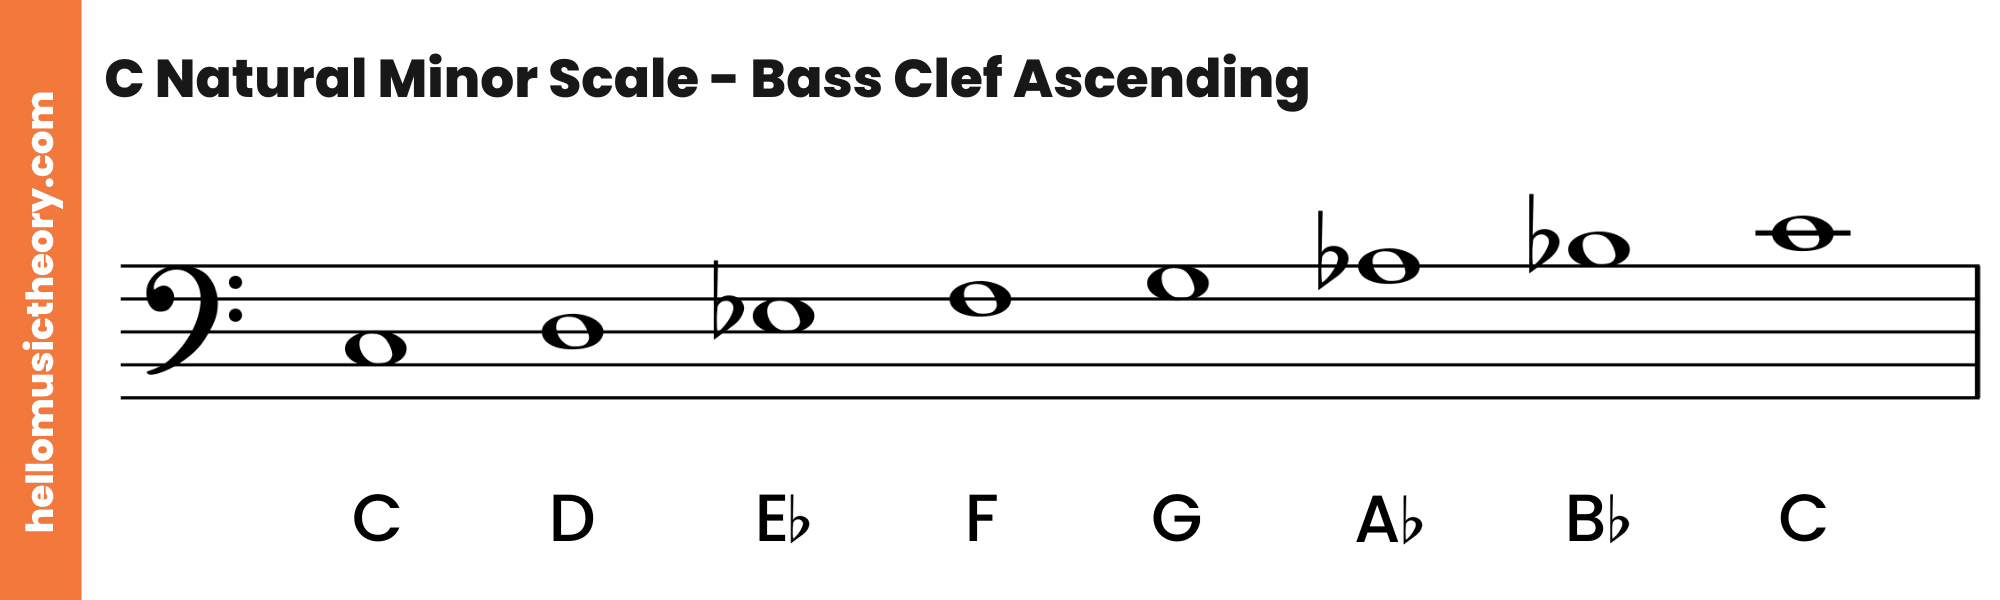 C Natural Minor Scale Bass Clef Ascending